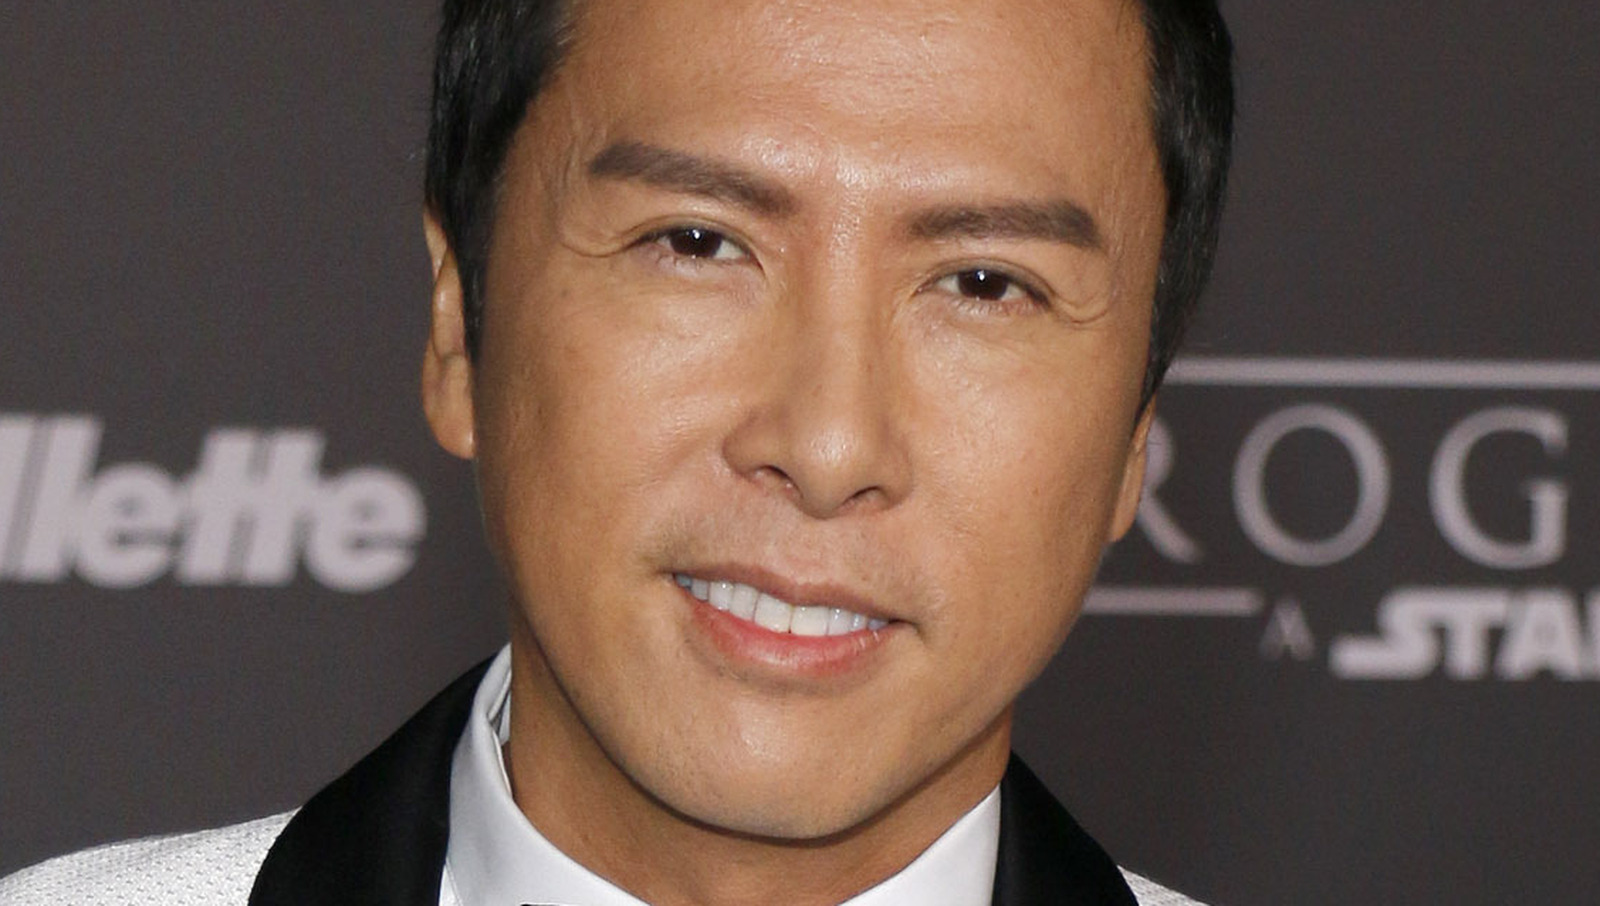 The Best And Worst Donnie Yen Movies Ranked | tyello.com